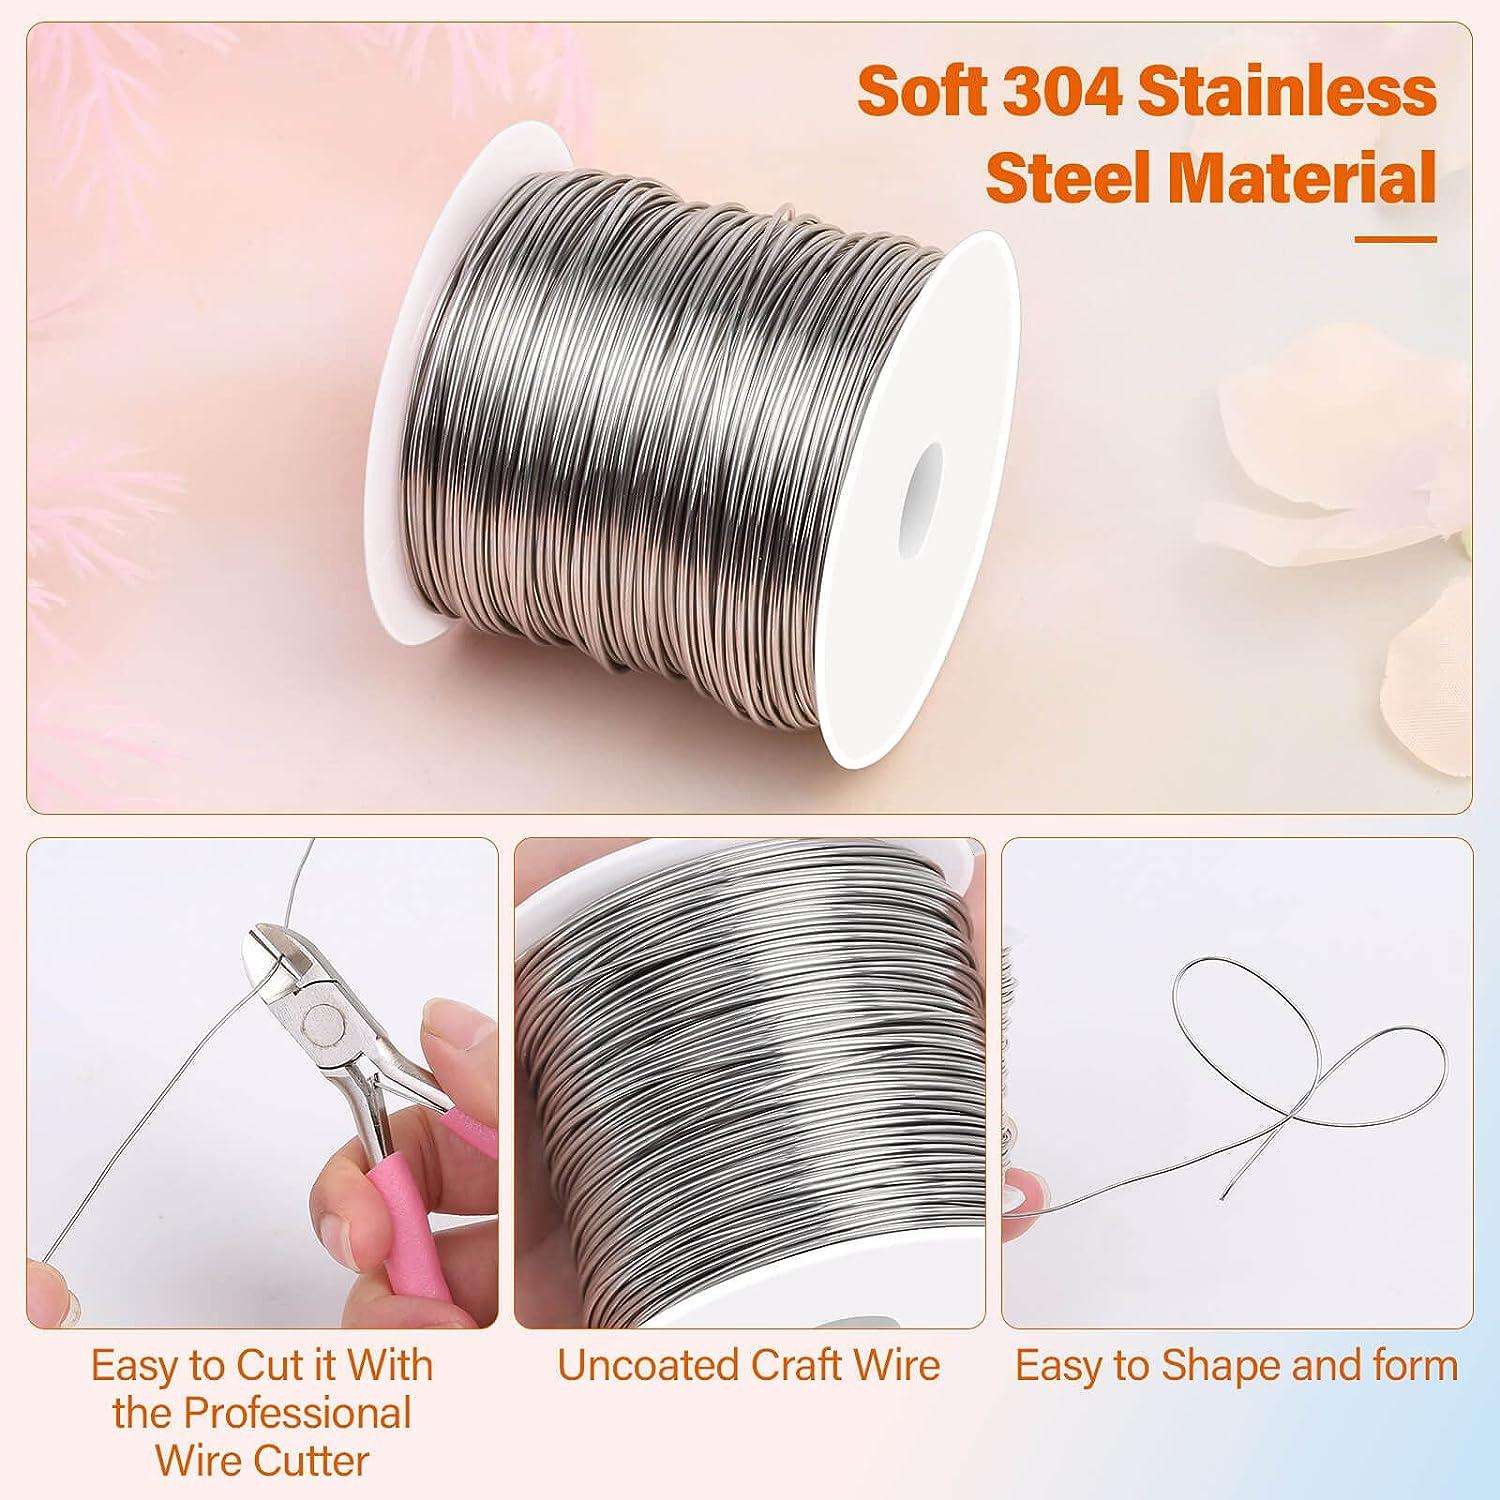 20 Gauge Stainless Steel Wire for Jewelry Making, Bailing Wire